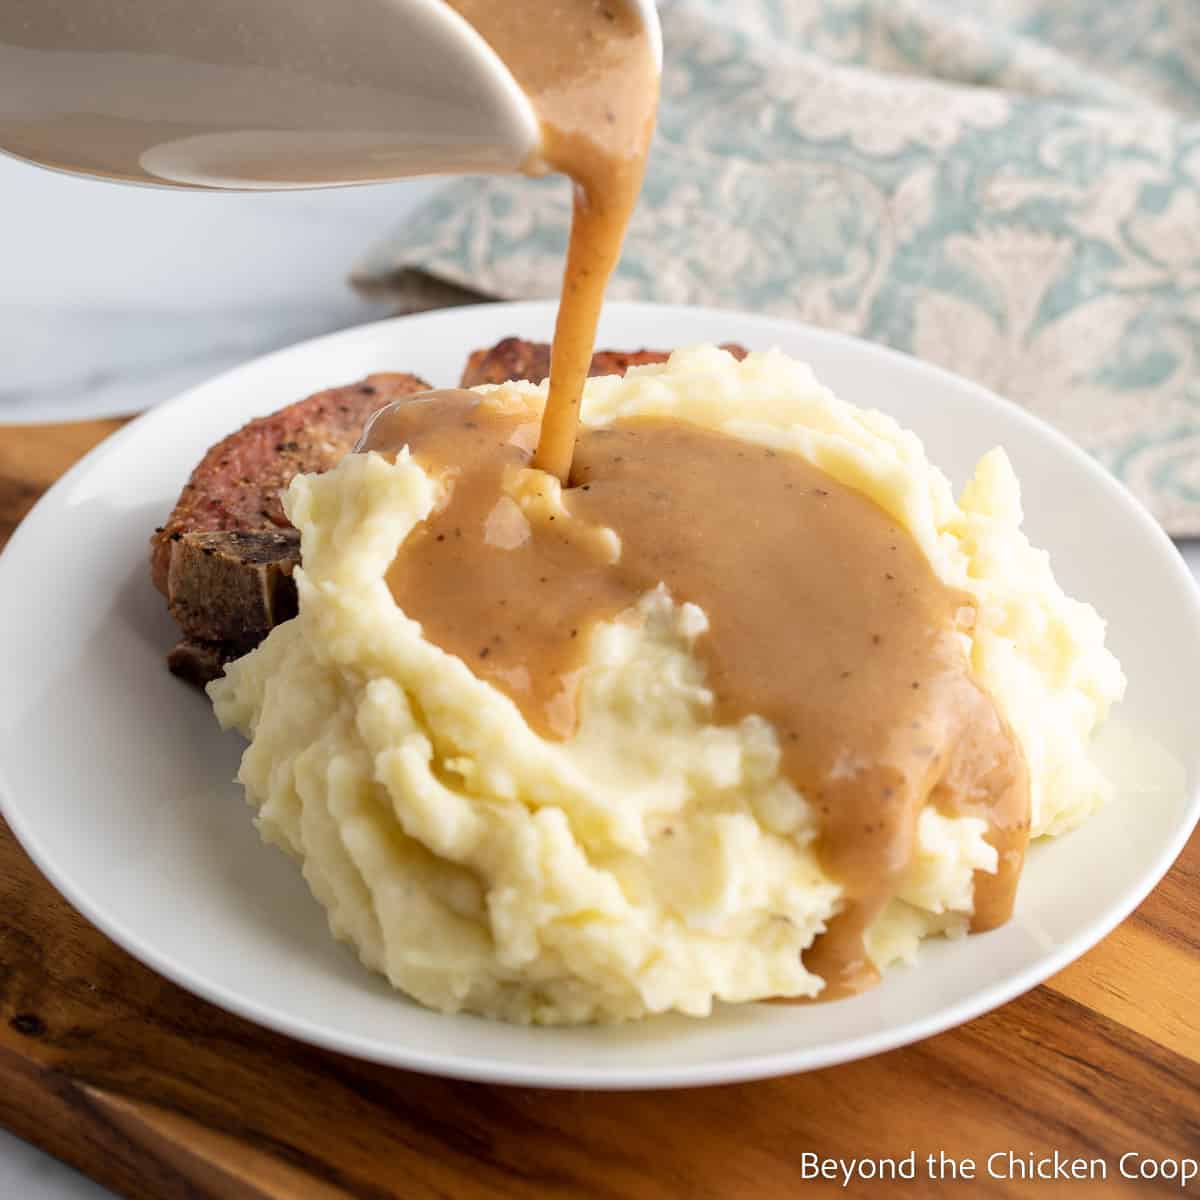 Brown gravy pouring over a pile of mashed potatoes.